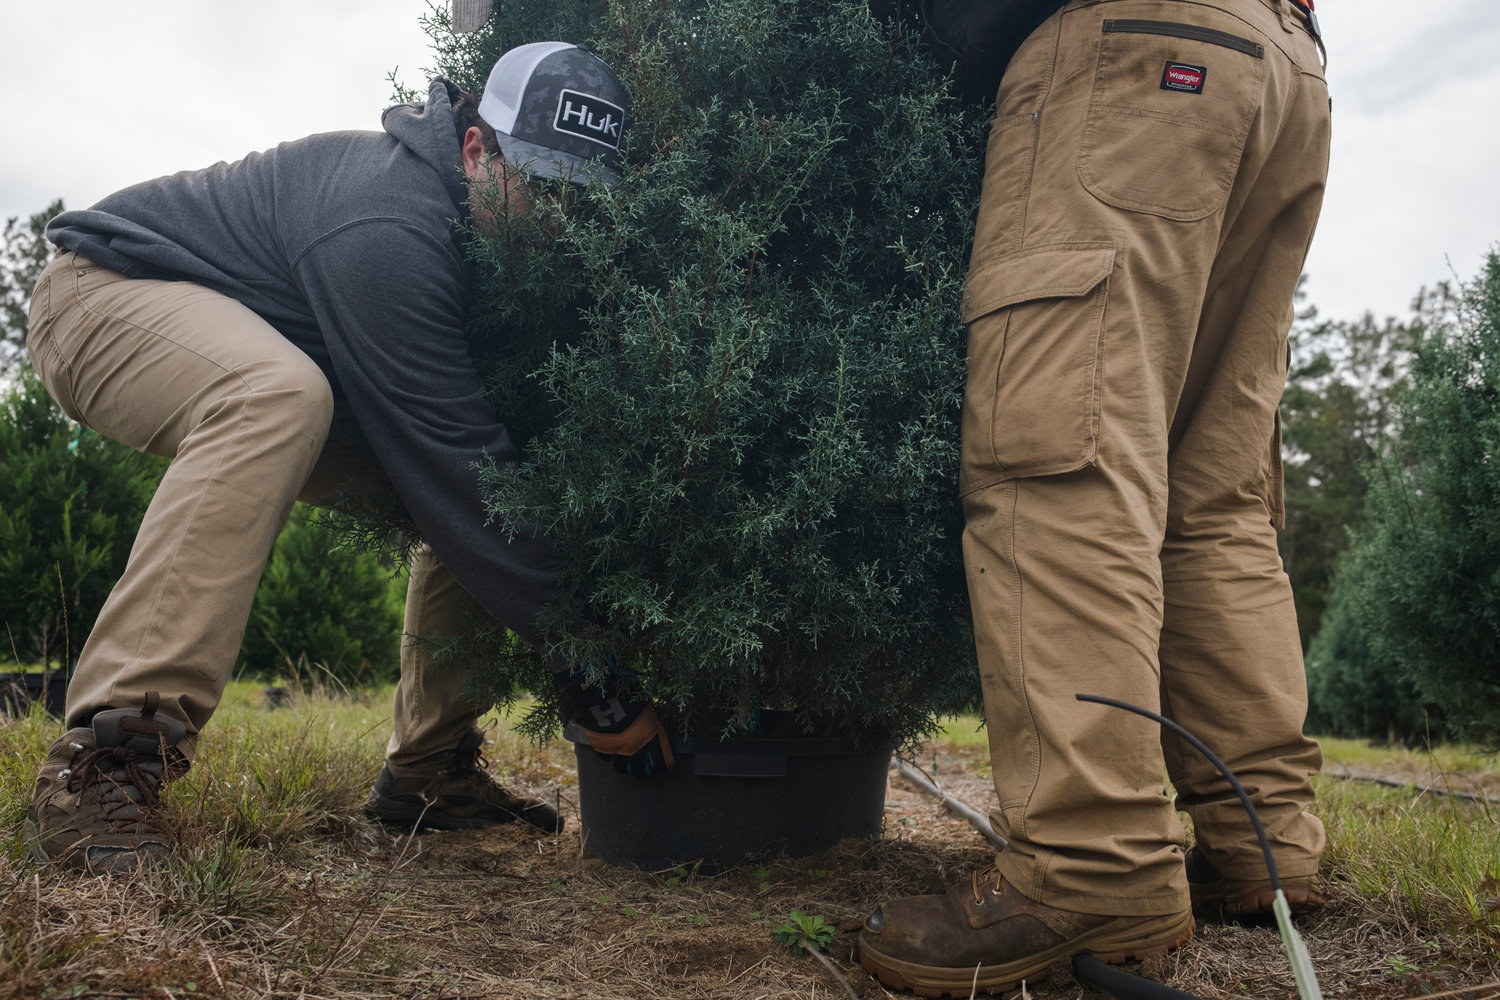 MICAH GREEN / GULF COAST MEDIA

Graham Wiggins Joshua Gregorius pull a container-grown Christmas tree to put on a customer’s trailer at Fish River Christmas Tree Farm on Wednesday.